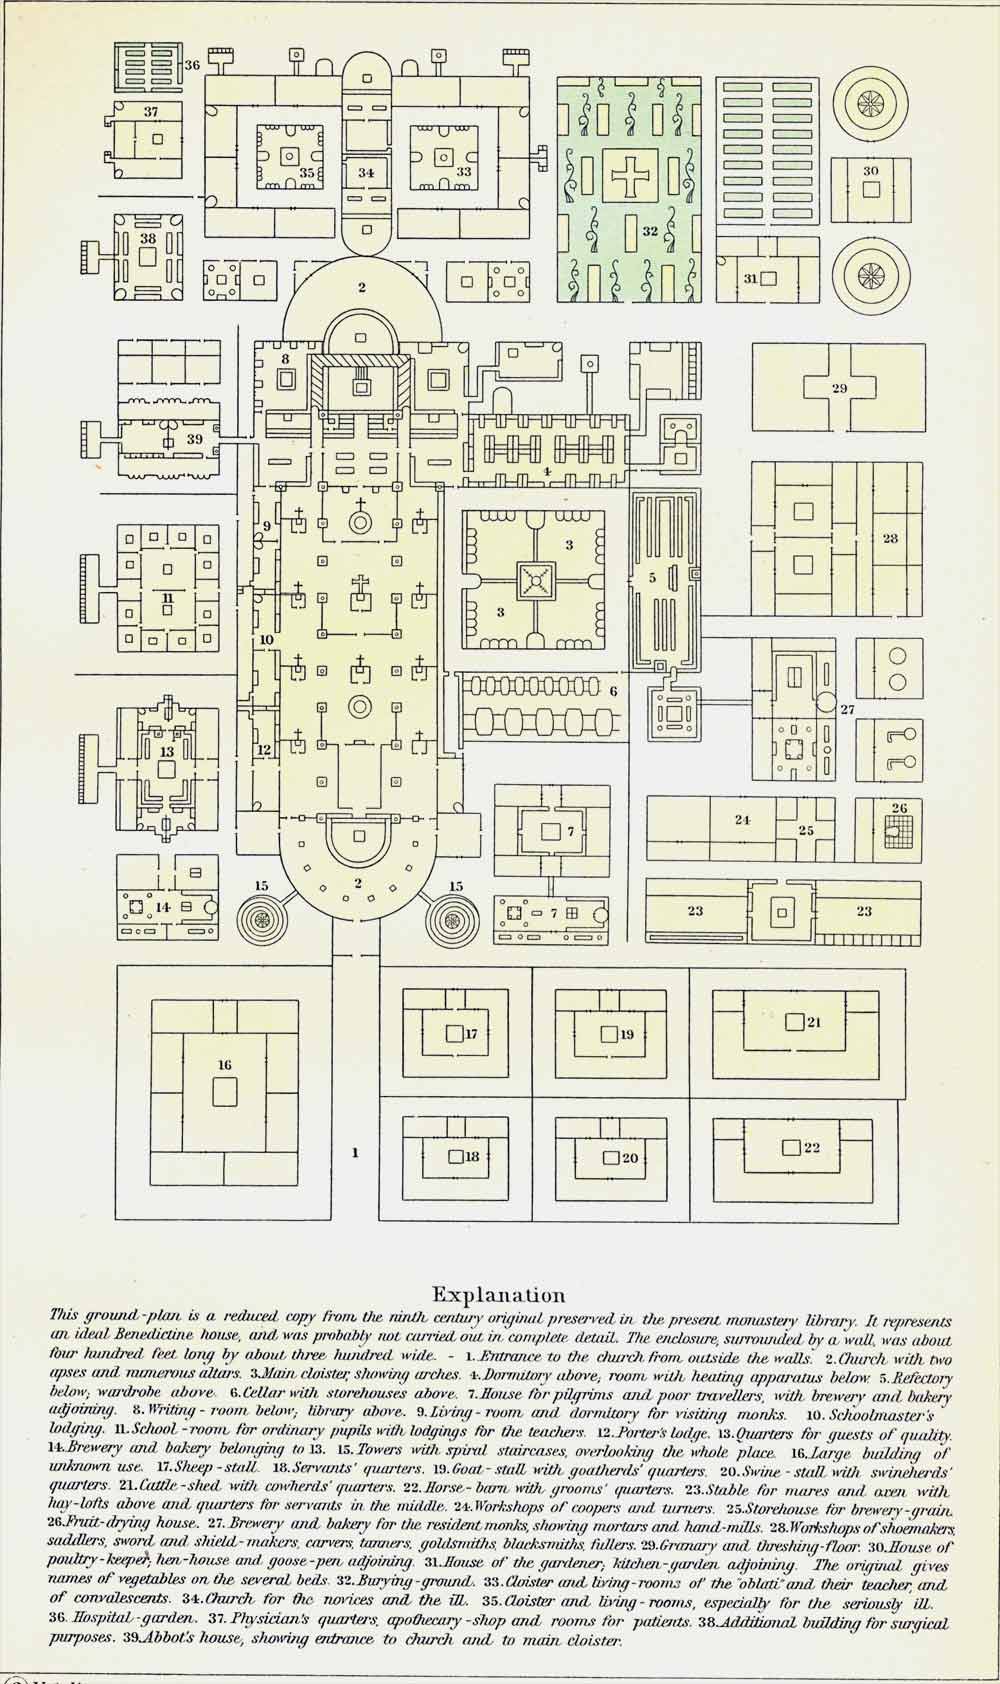 Ground Plan of a Monastery